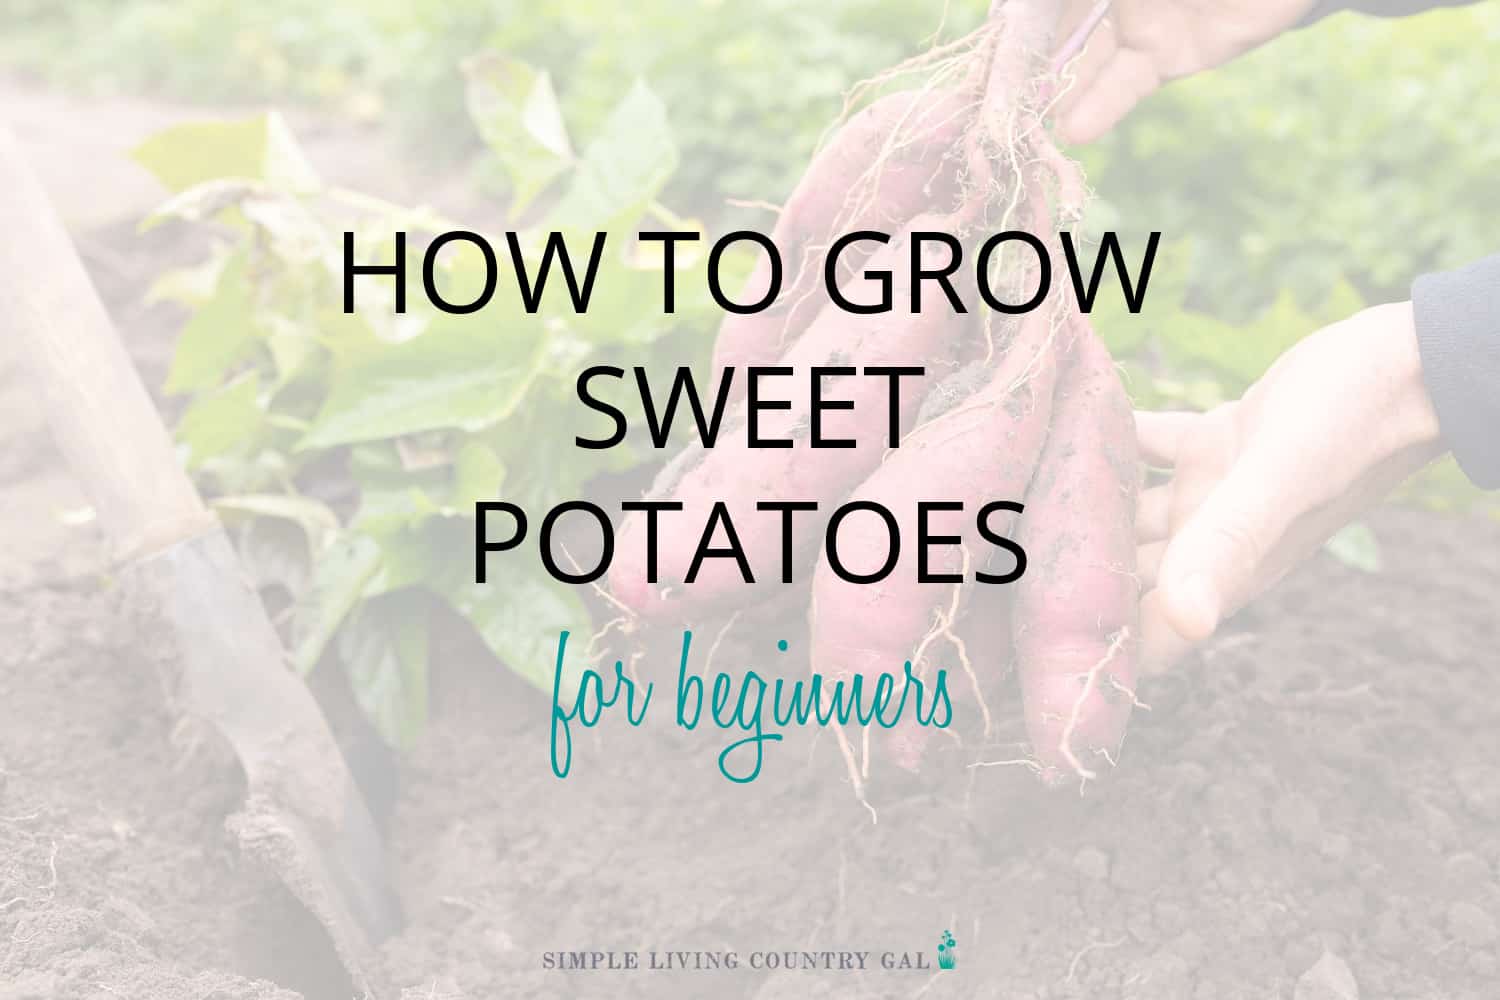 How to Grow Sweet Potatoes for Beginners